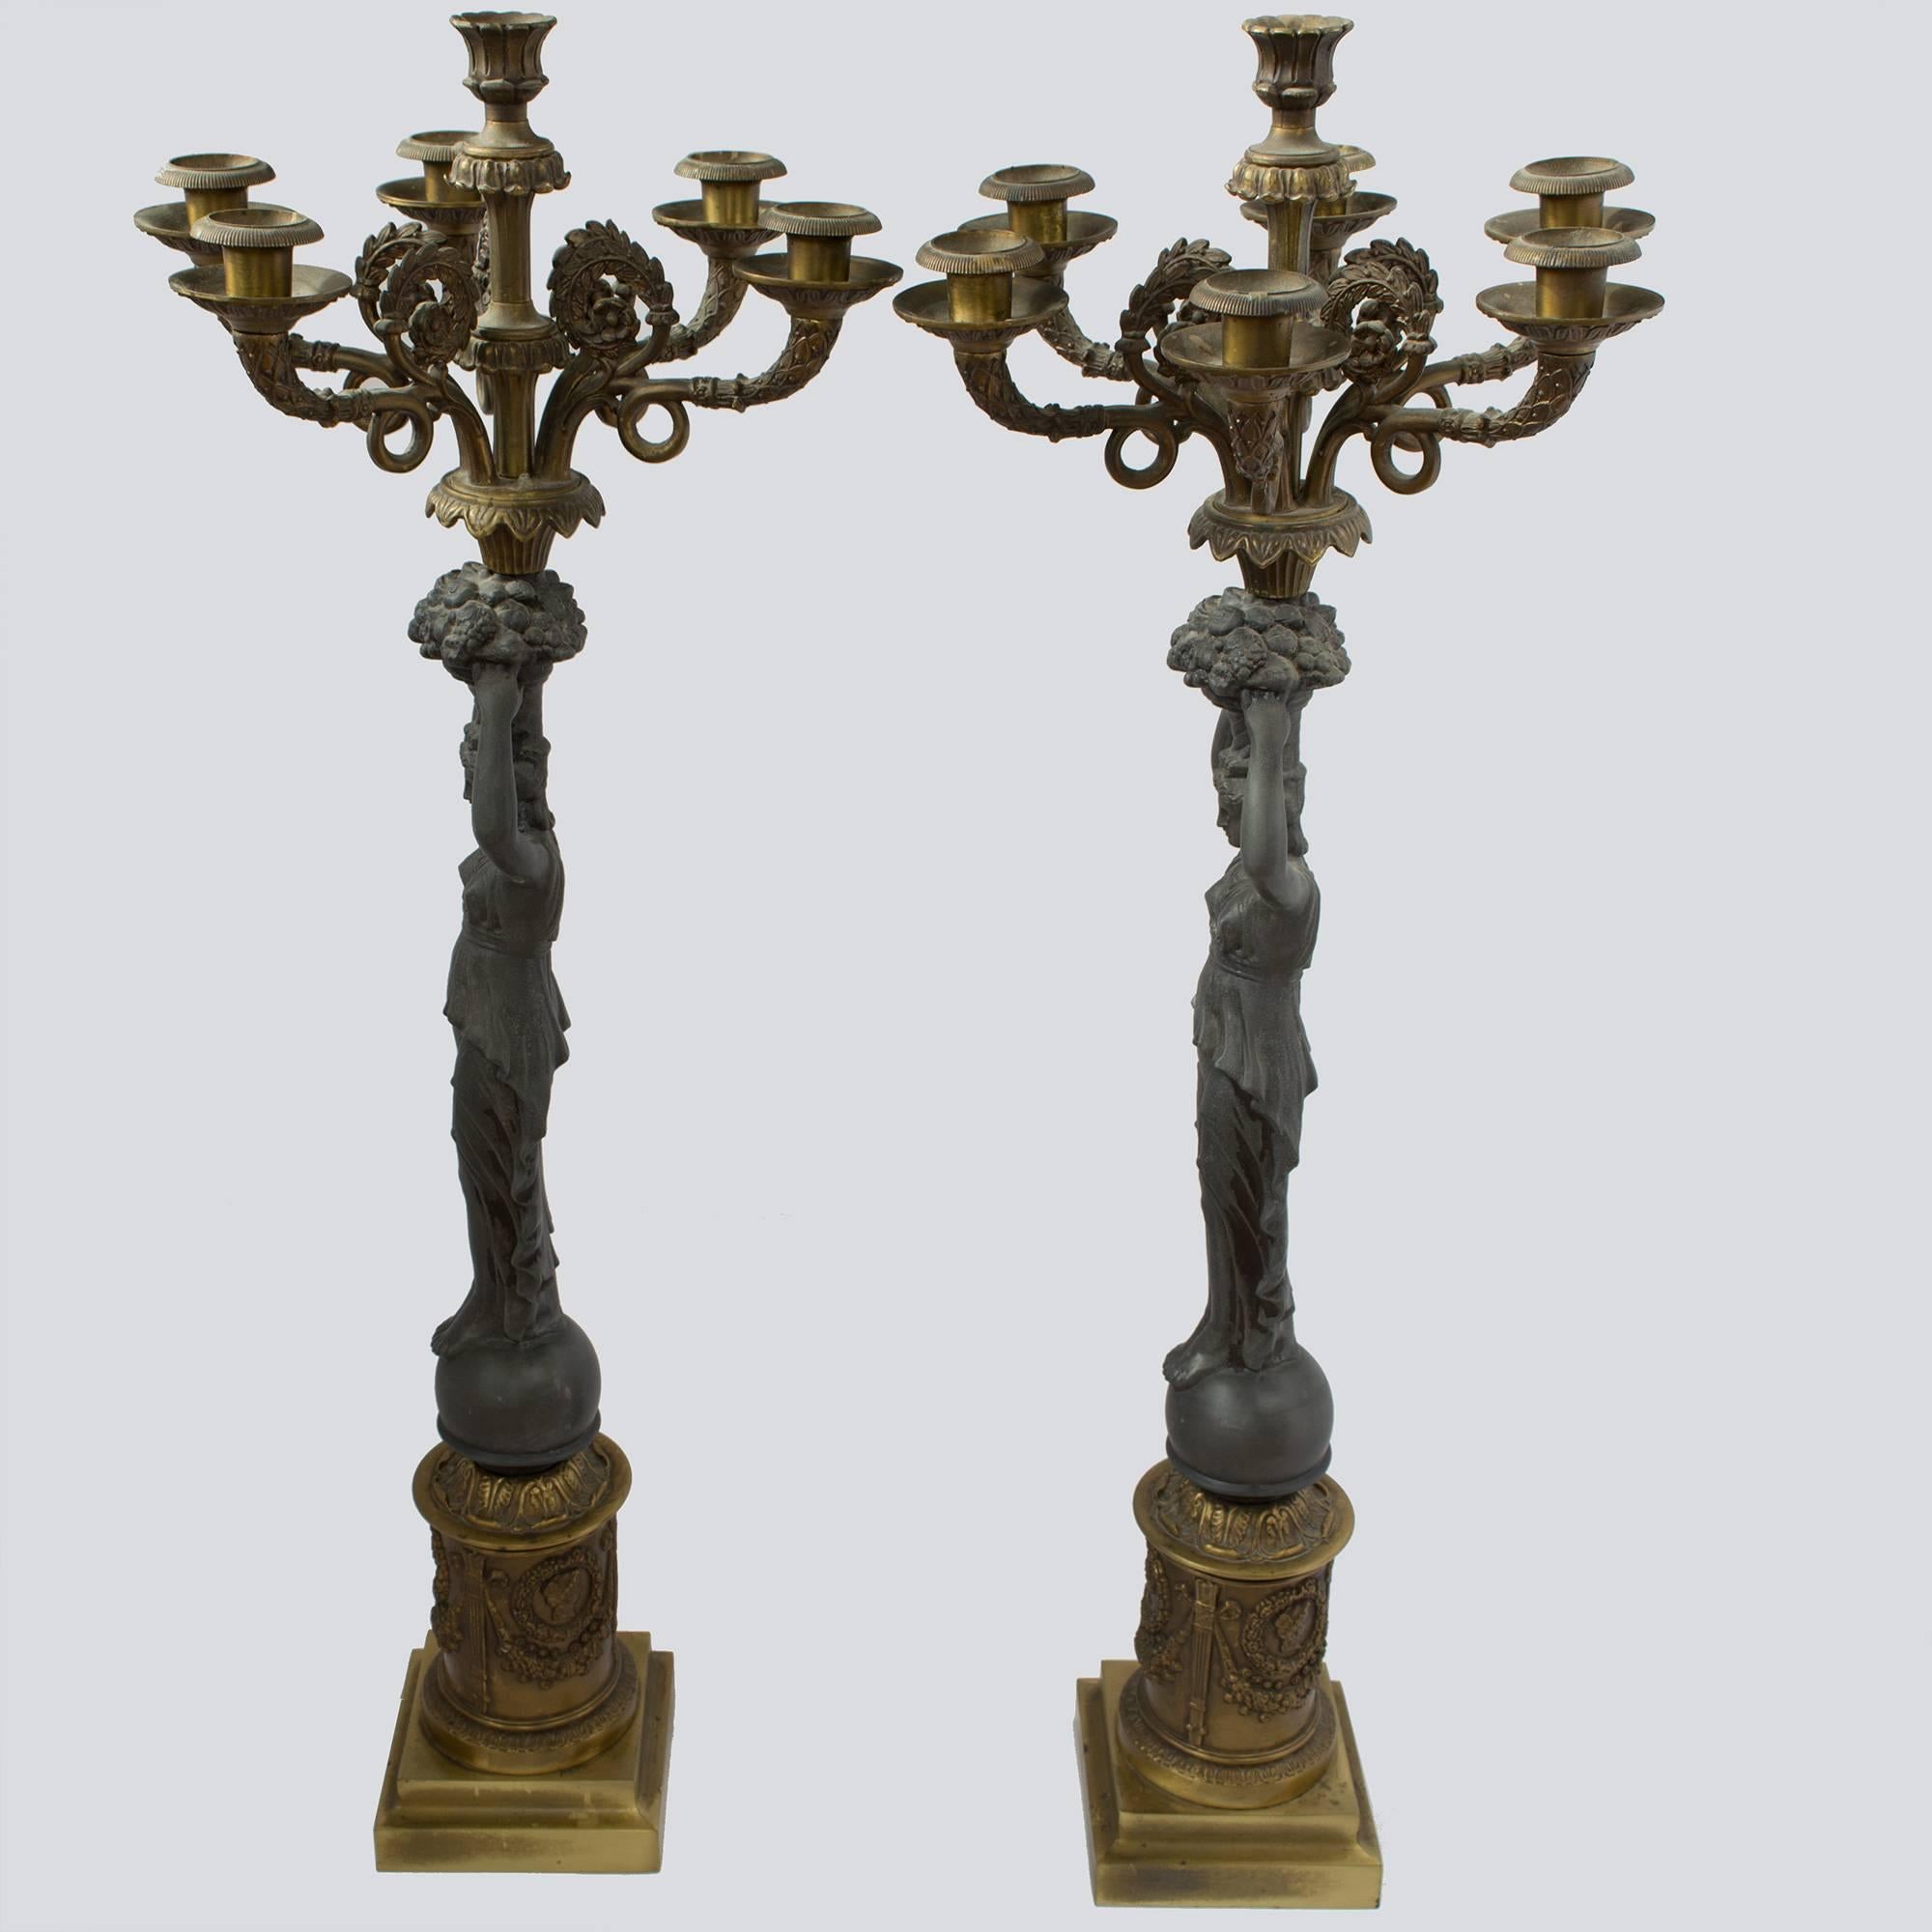 About
Pair of 19th century bronze candelabras with beautiful details, featuring six arms and centre lights, in gilt bronze. The pair features Grecian goddesses with fascinating draping in details each holding an abundant basket atop their heads.